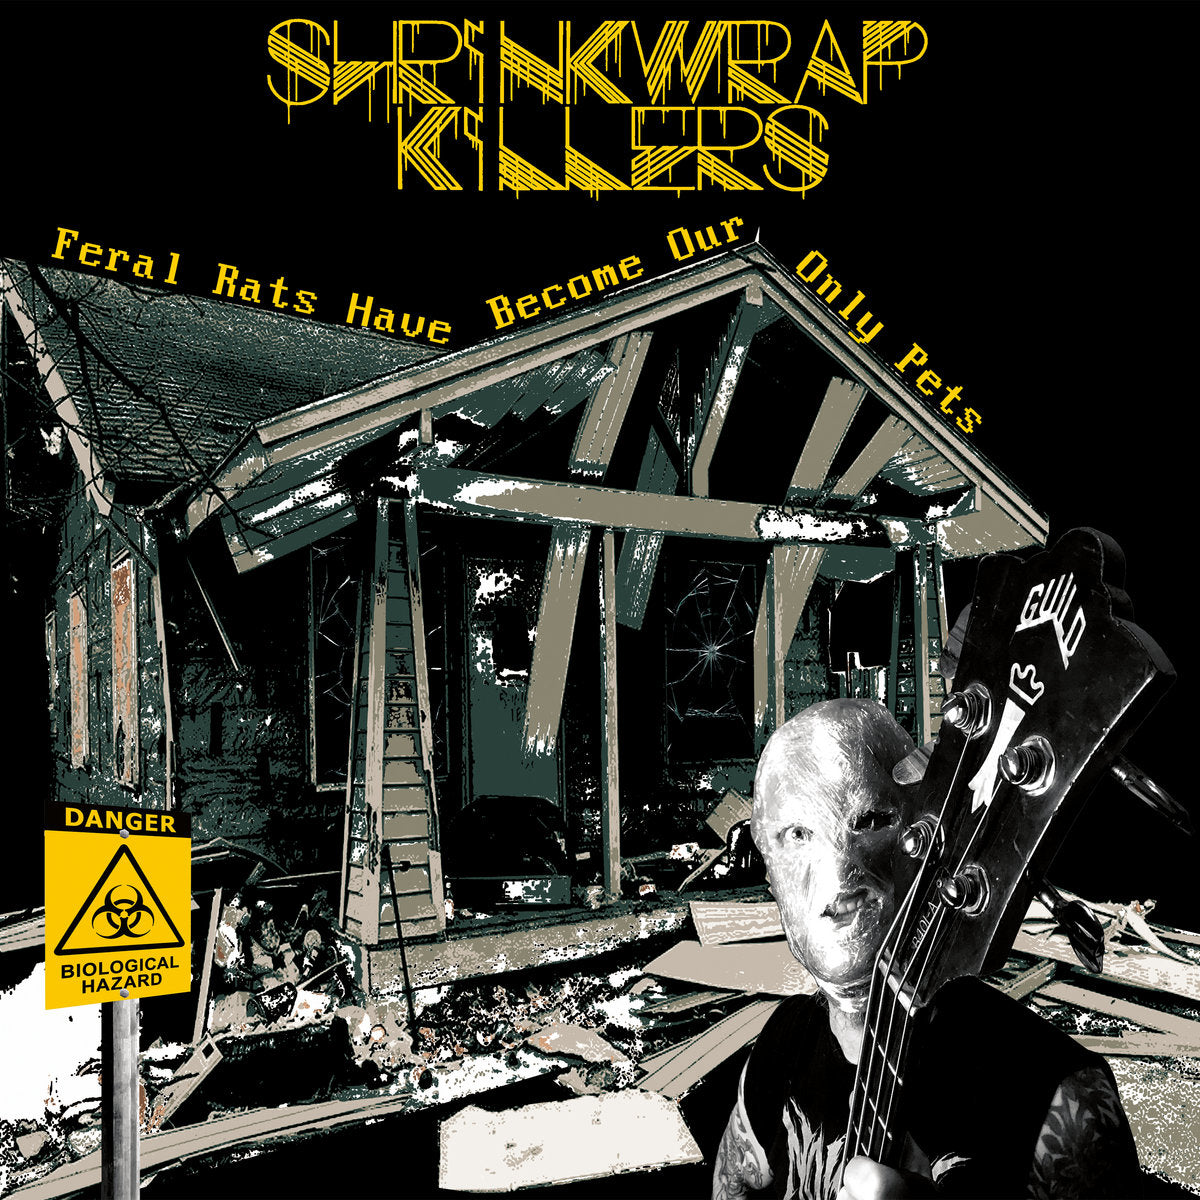 SHRINKWRAP KILLERS - FERAL RATS HAVE BECOME OUR ONLY PETS Vinyl LP